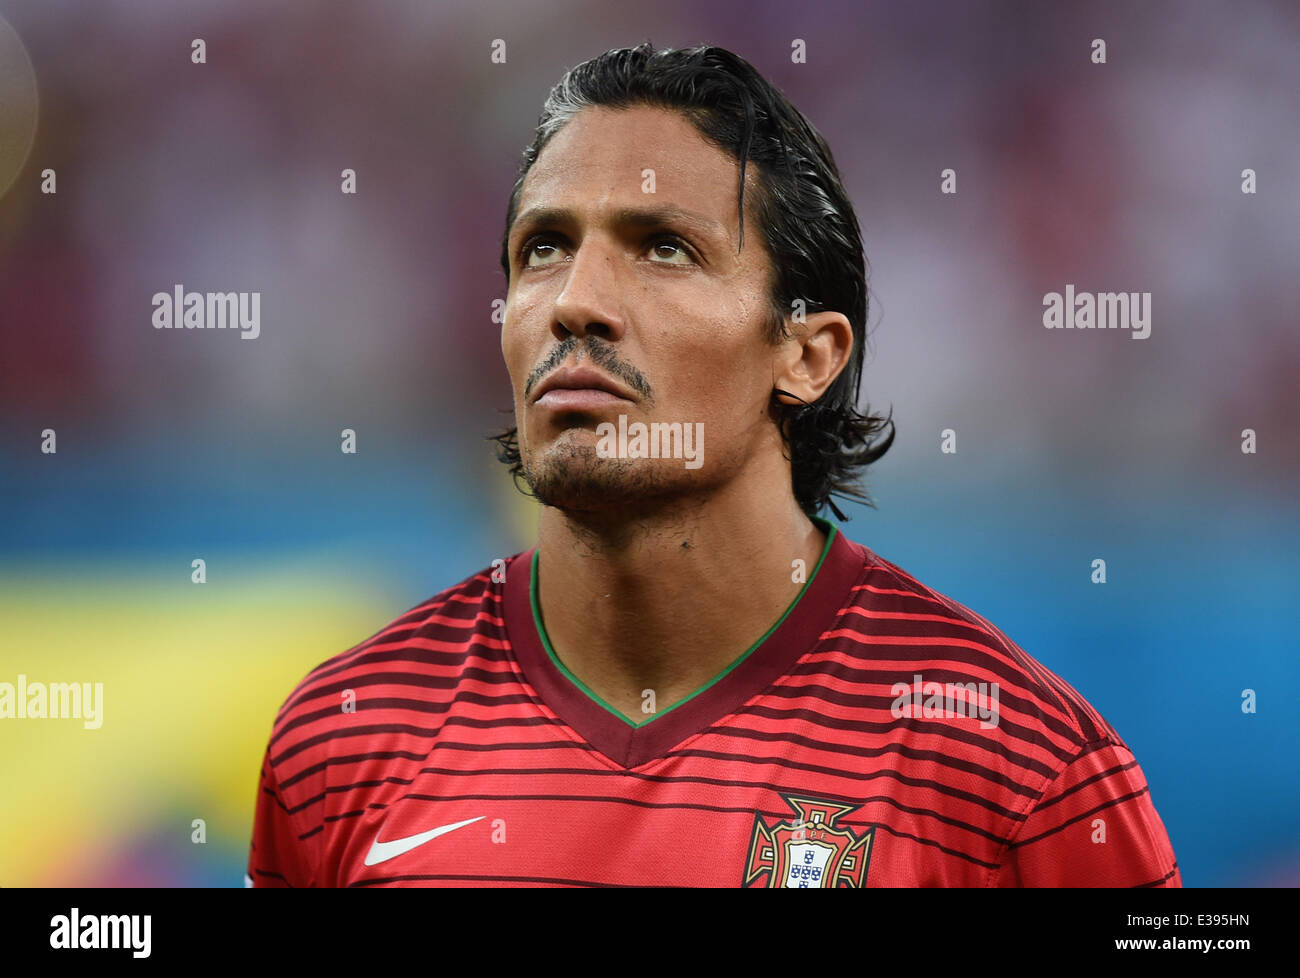 Manaus, Brazil. 22nd June, 2014. Bruno Alves of Ronaldo seen the national anthem prior to the FIFA World Cup 2014 group G preliminary round match between the USA and Portugal at the Arena Amazonia Stadium in Manaus, Brazil, 22 June 2014. Photo: Marius Becker/dpa/Alamy Live News Stock Photo